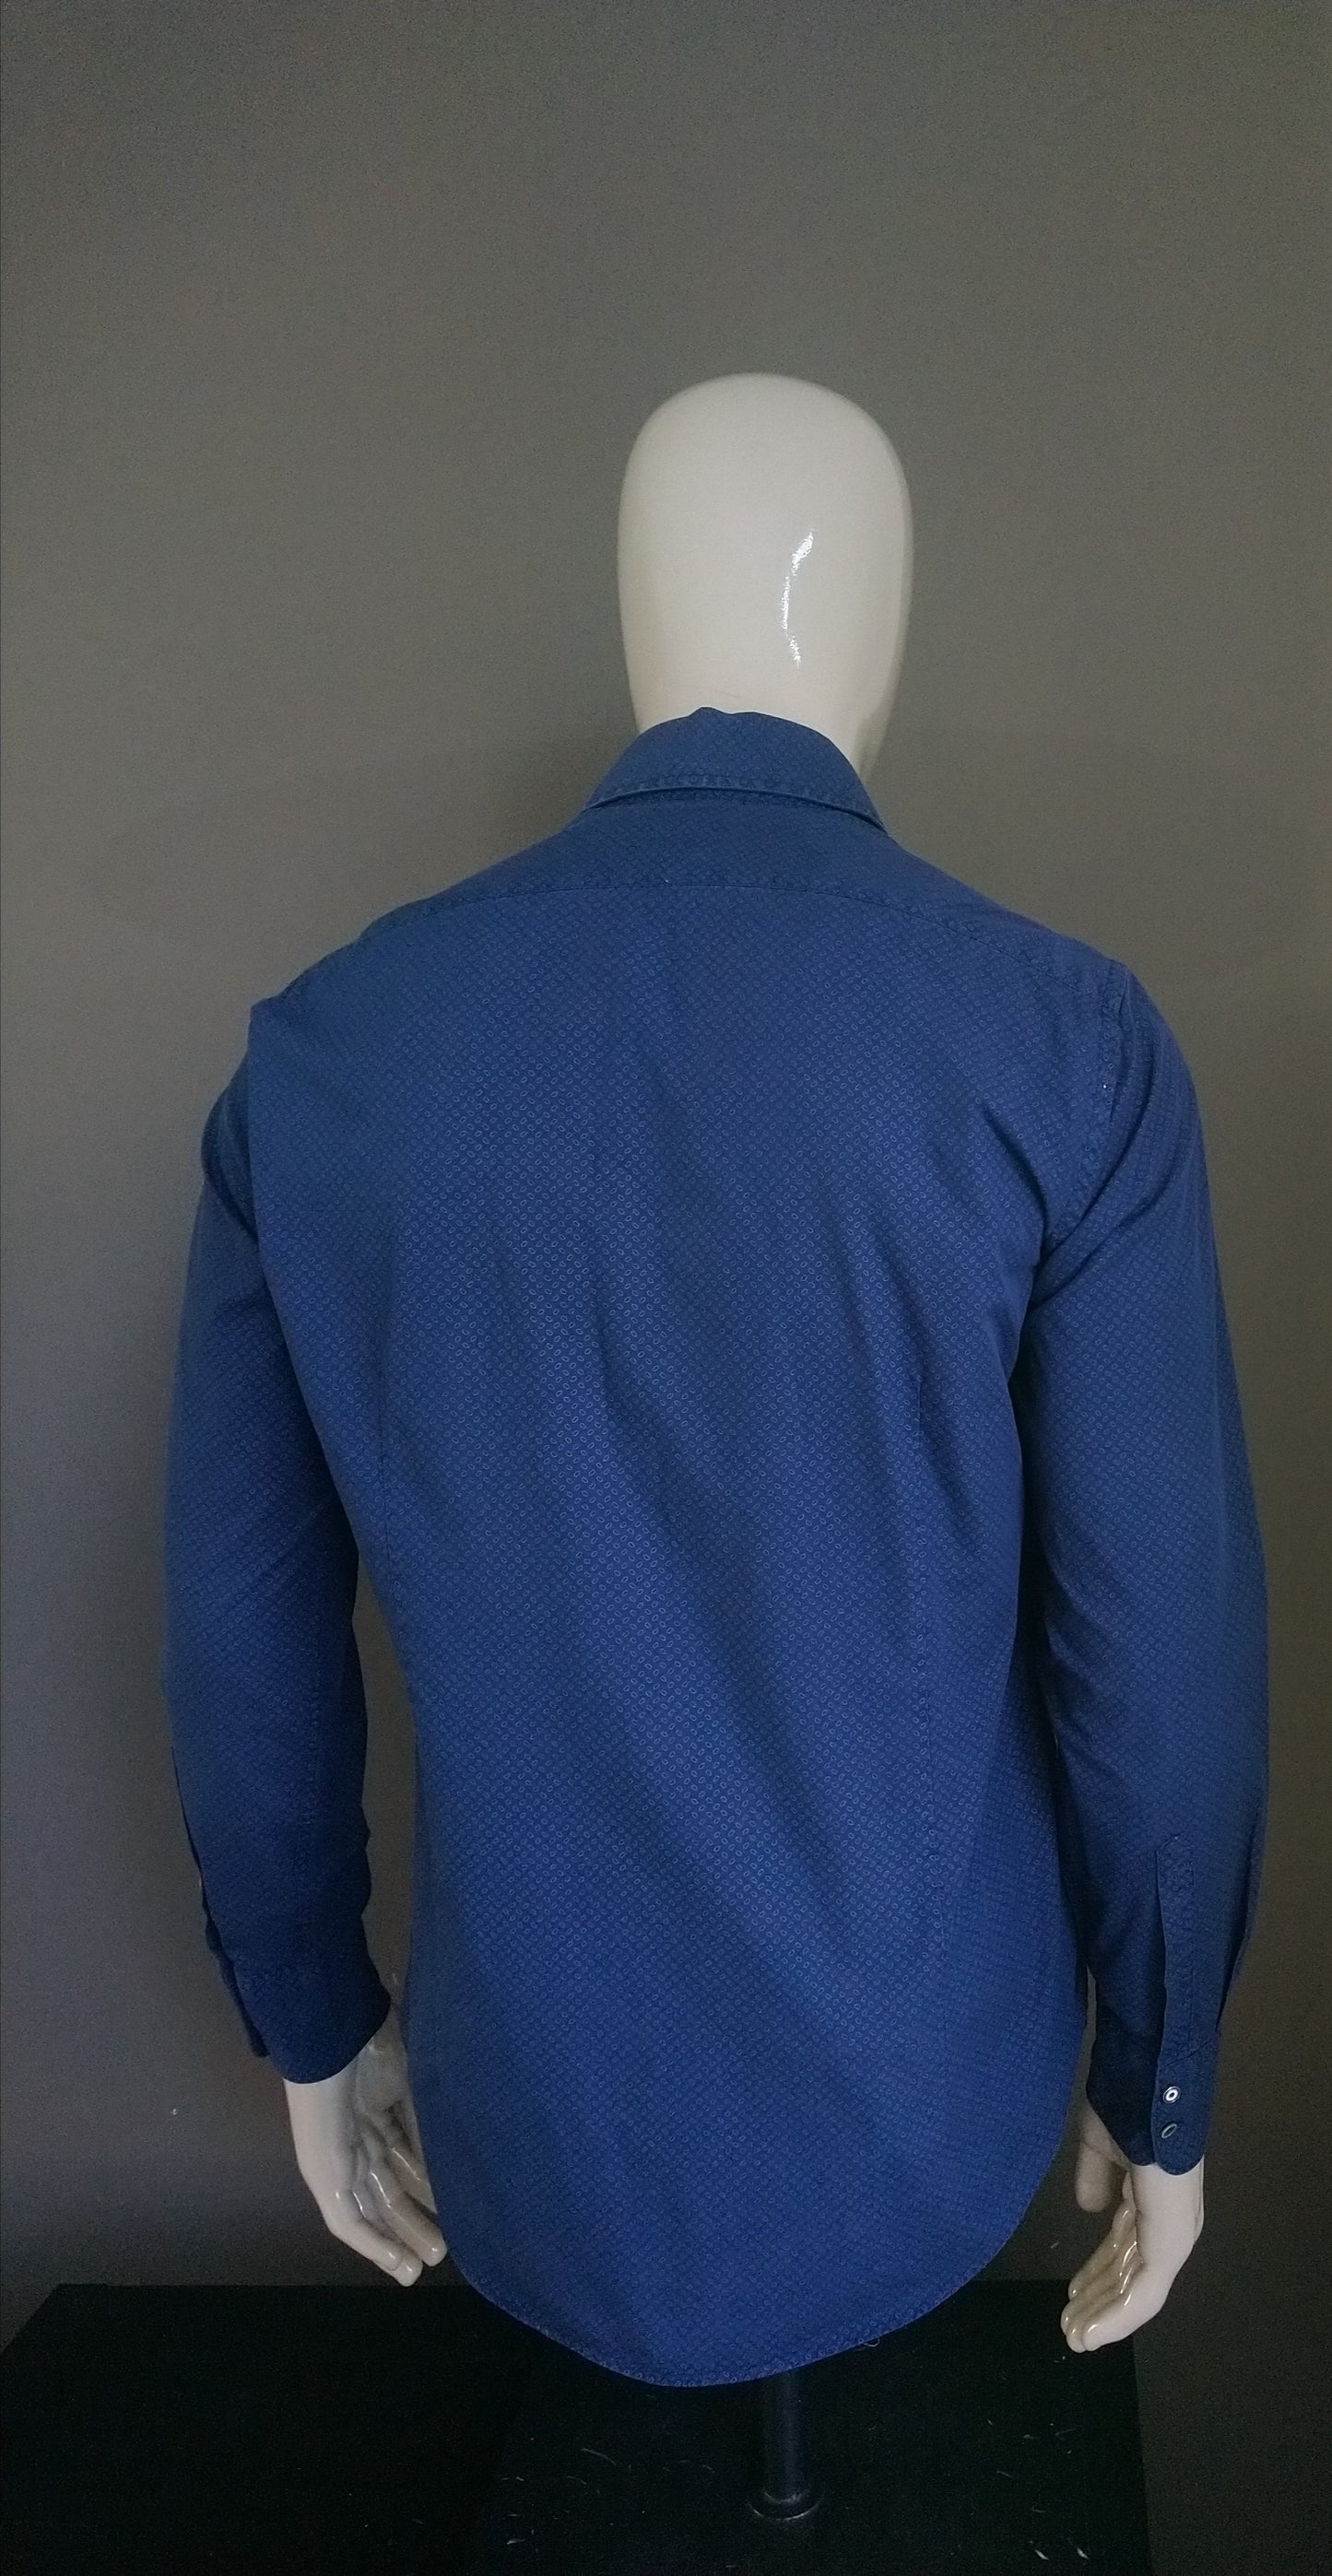 Blue industry shirt. Blue print. Size 40 / M. Perfect Fit.